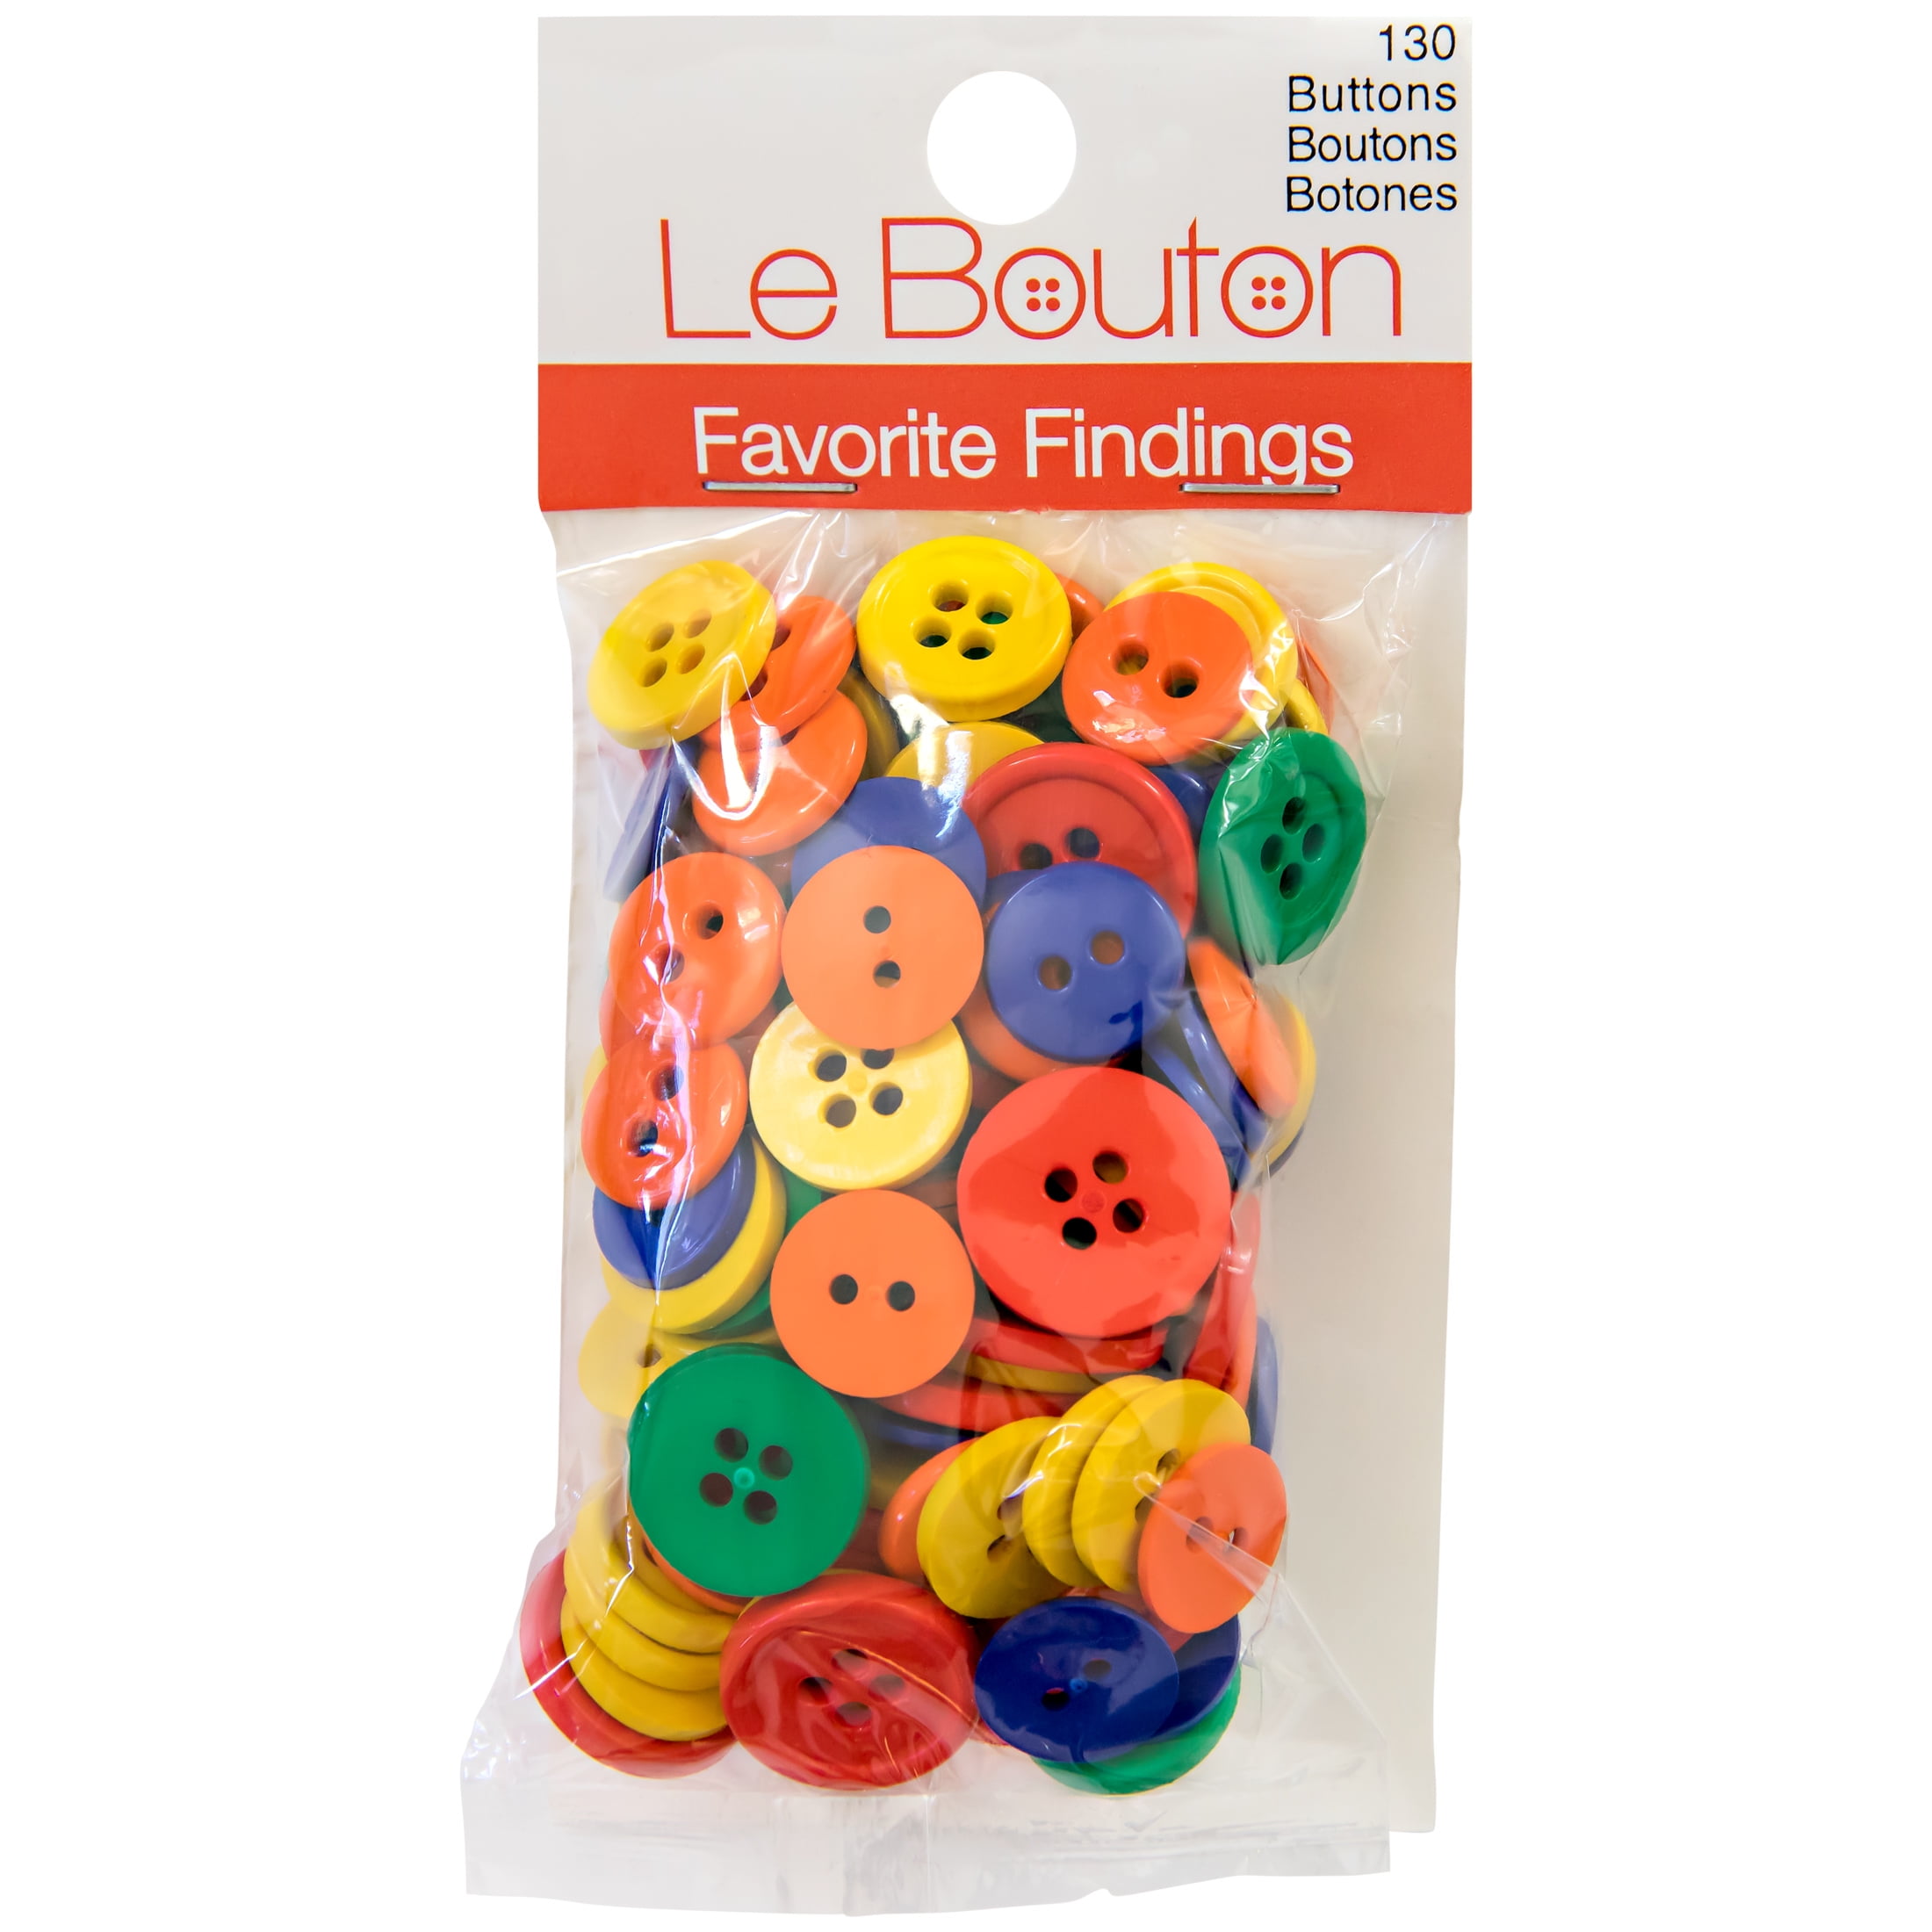 Children's craft buttons recalled over high lead levels - CBS New York